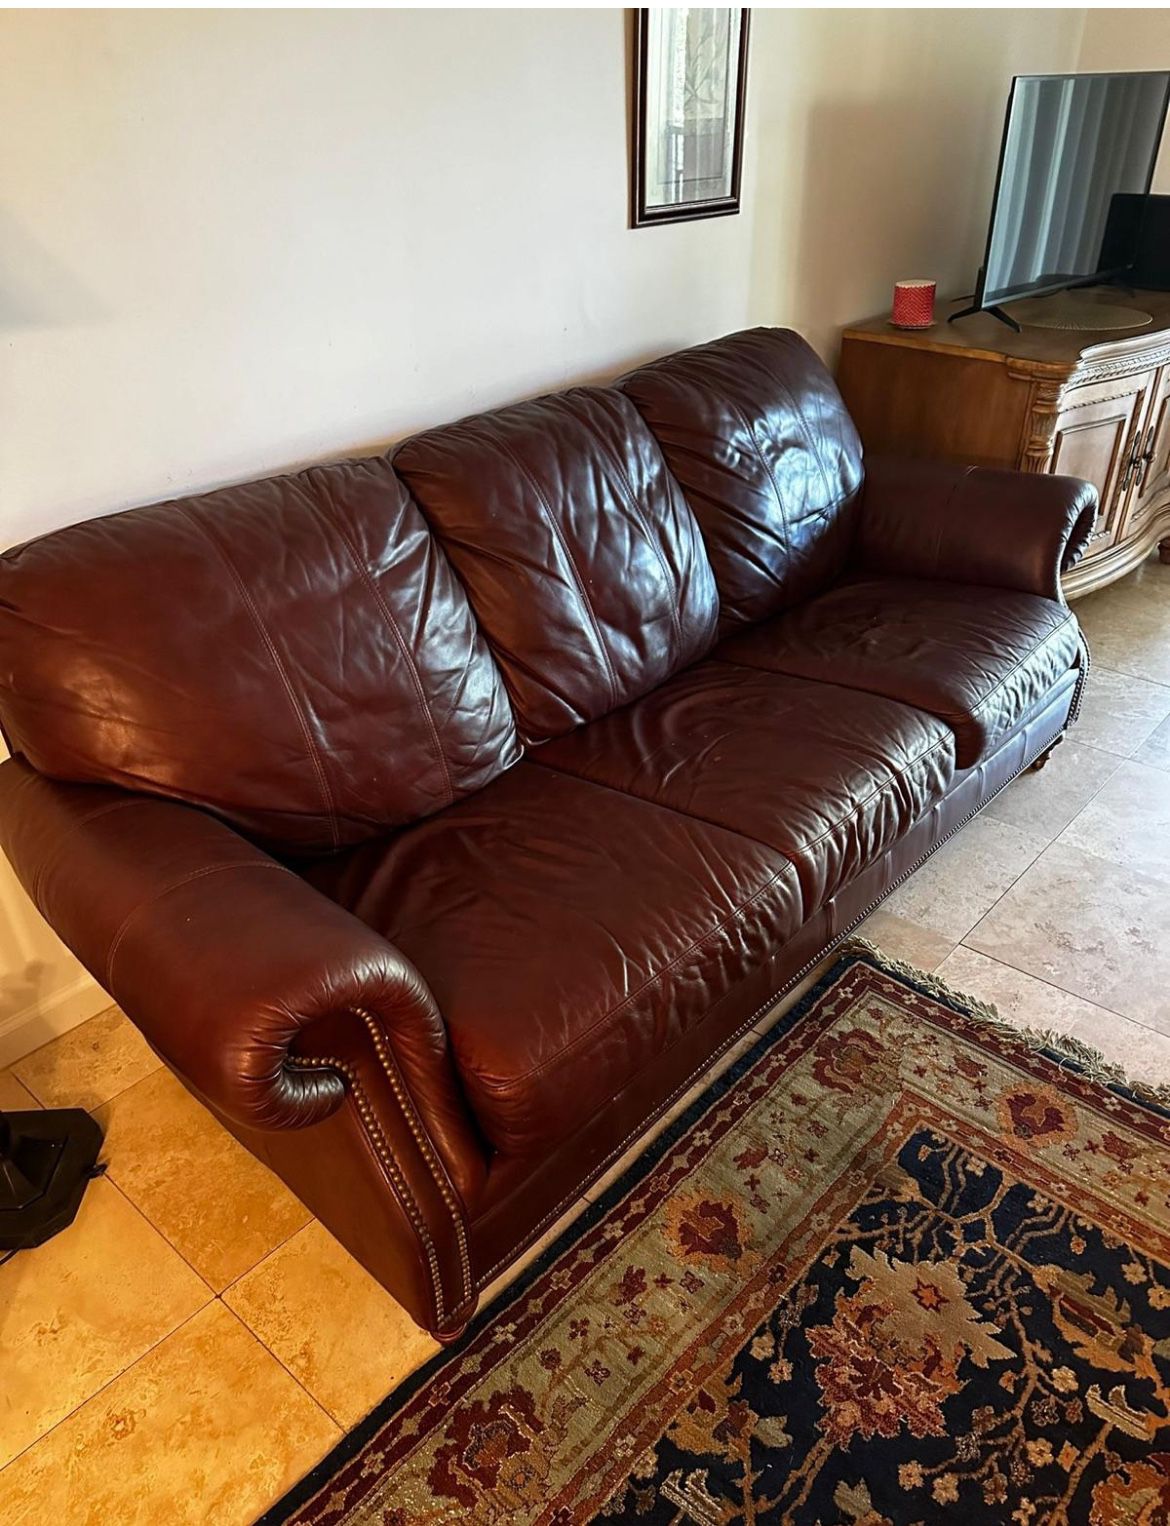 Leather Couch With a Lamp